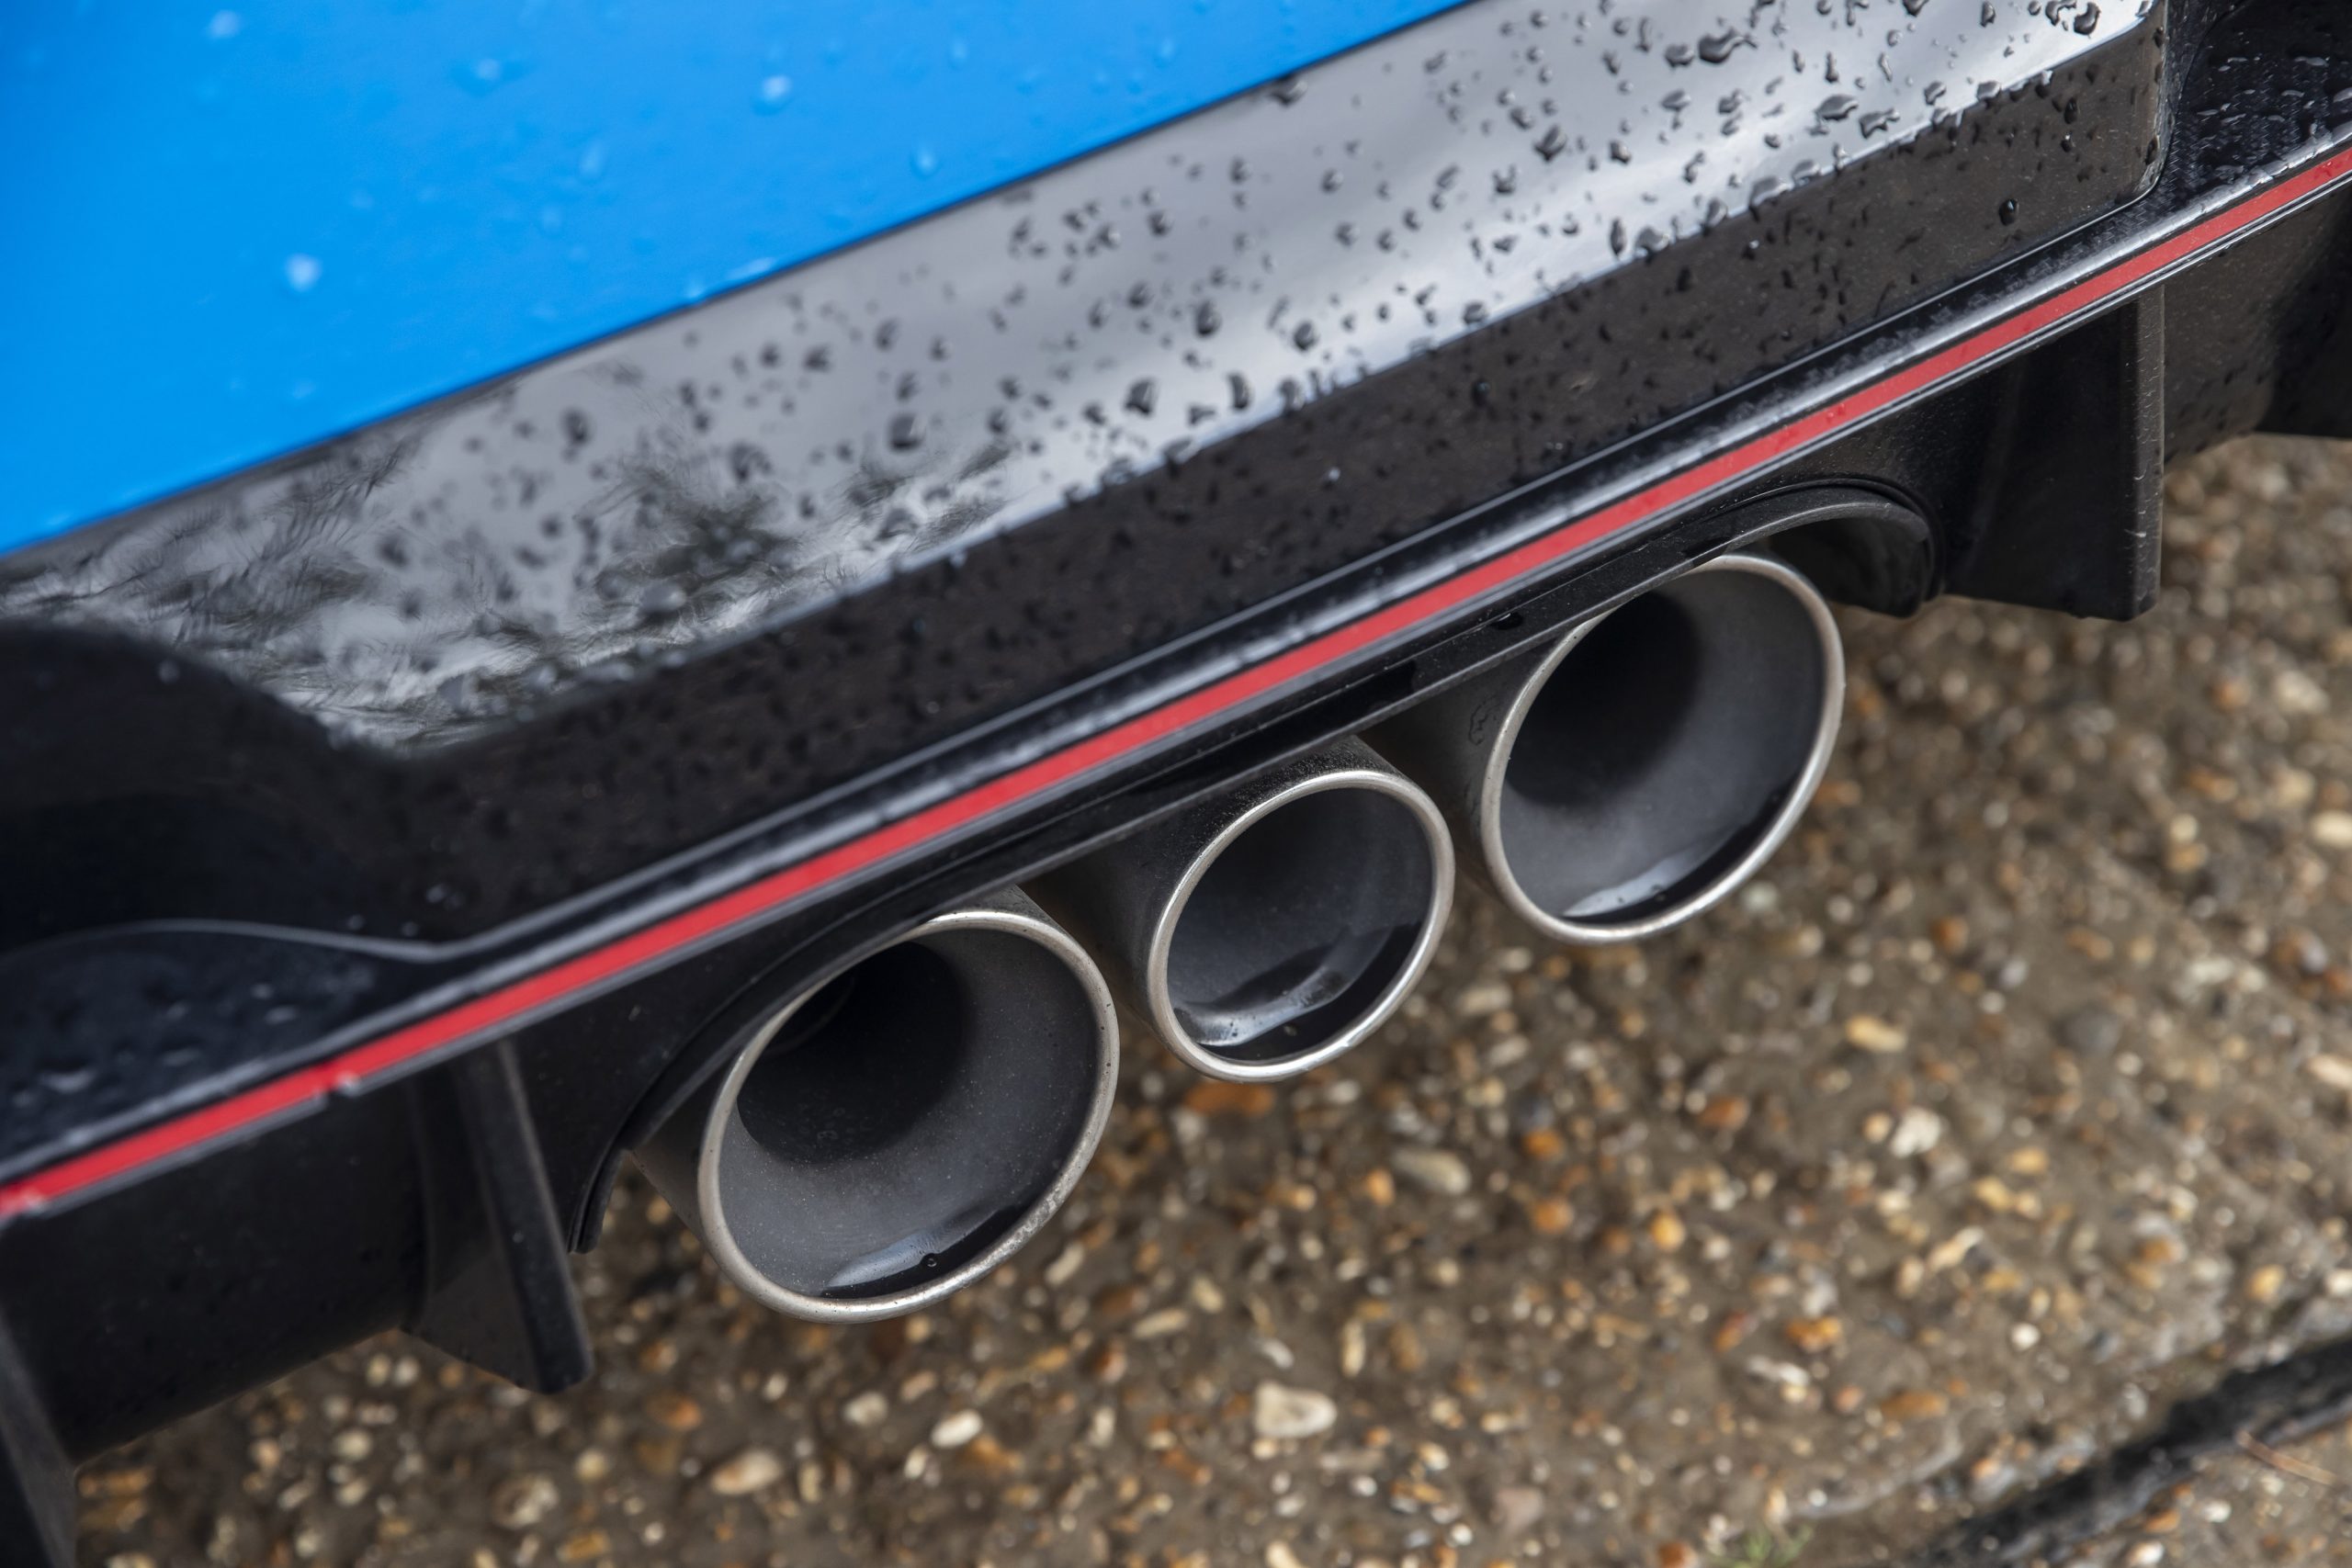 Honda Civic Type-R exhaust pipes